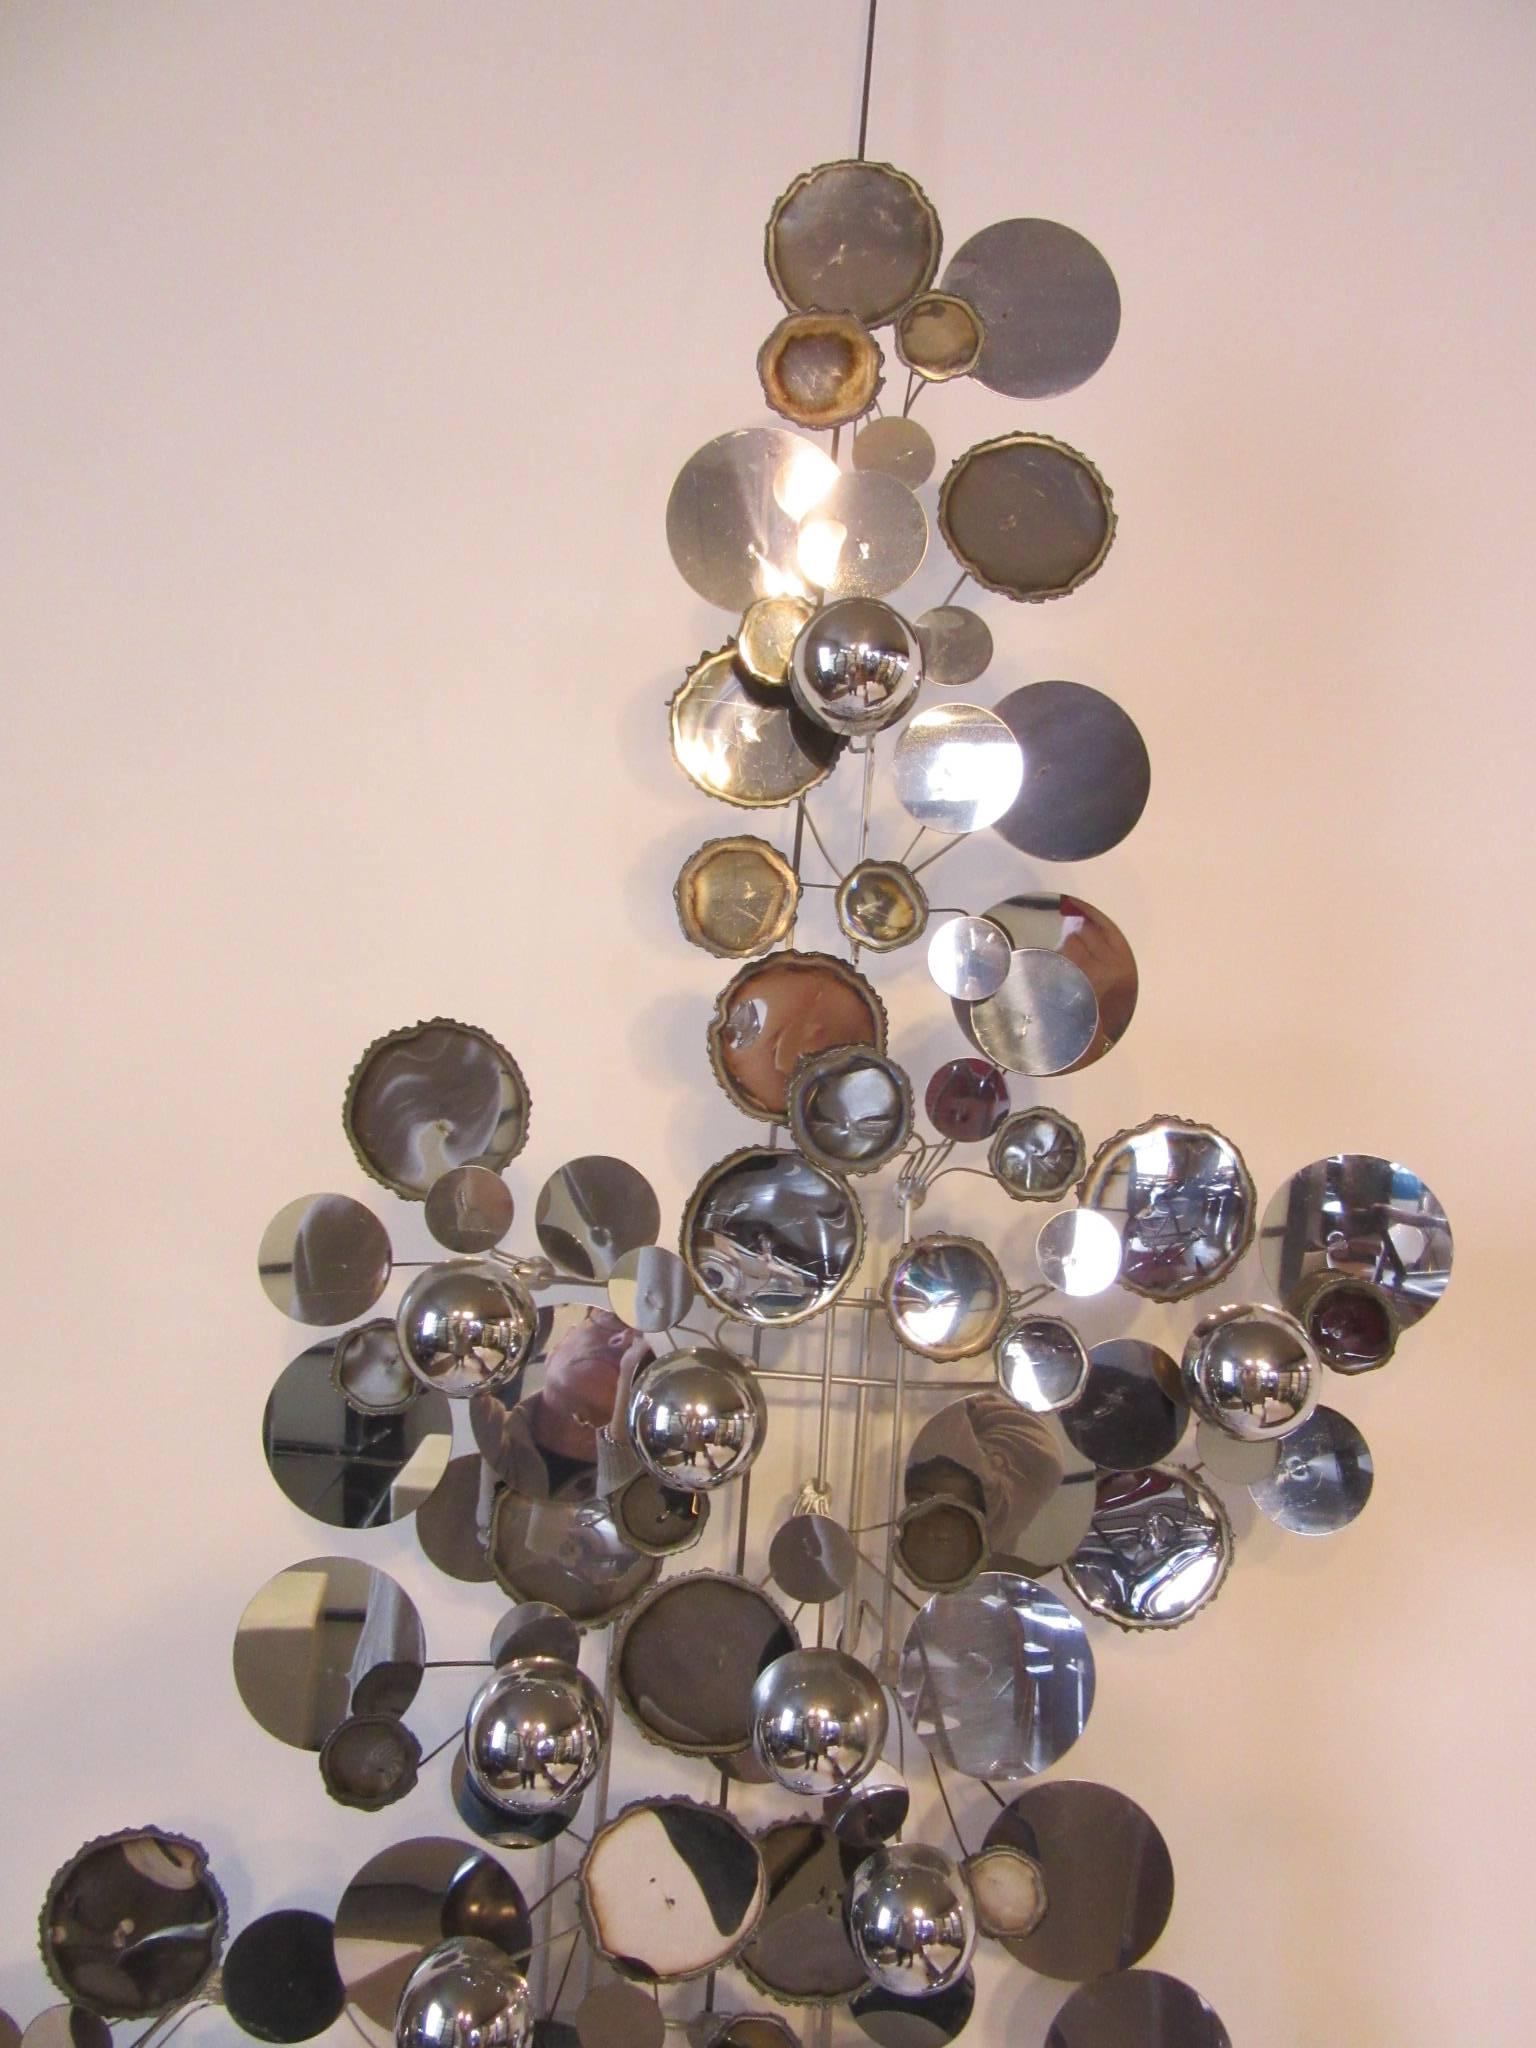 A chromed wall sculpture with torch cut and brazed edge circles, chrome circles and domed rain drop like pieces intermingled for a unique and interesting look, one of their best and most sought after designs. It can be hung vertically or